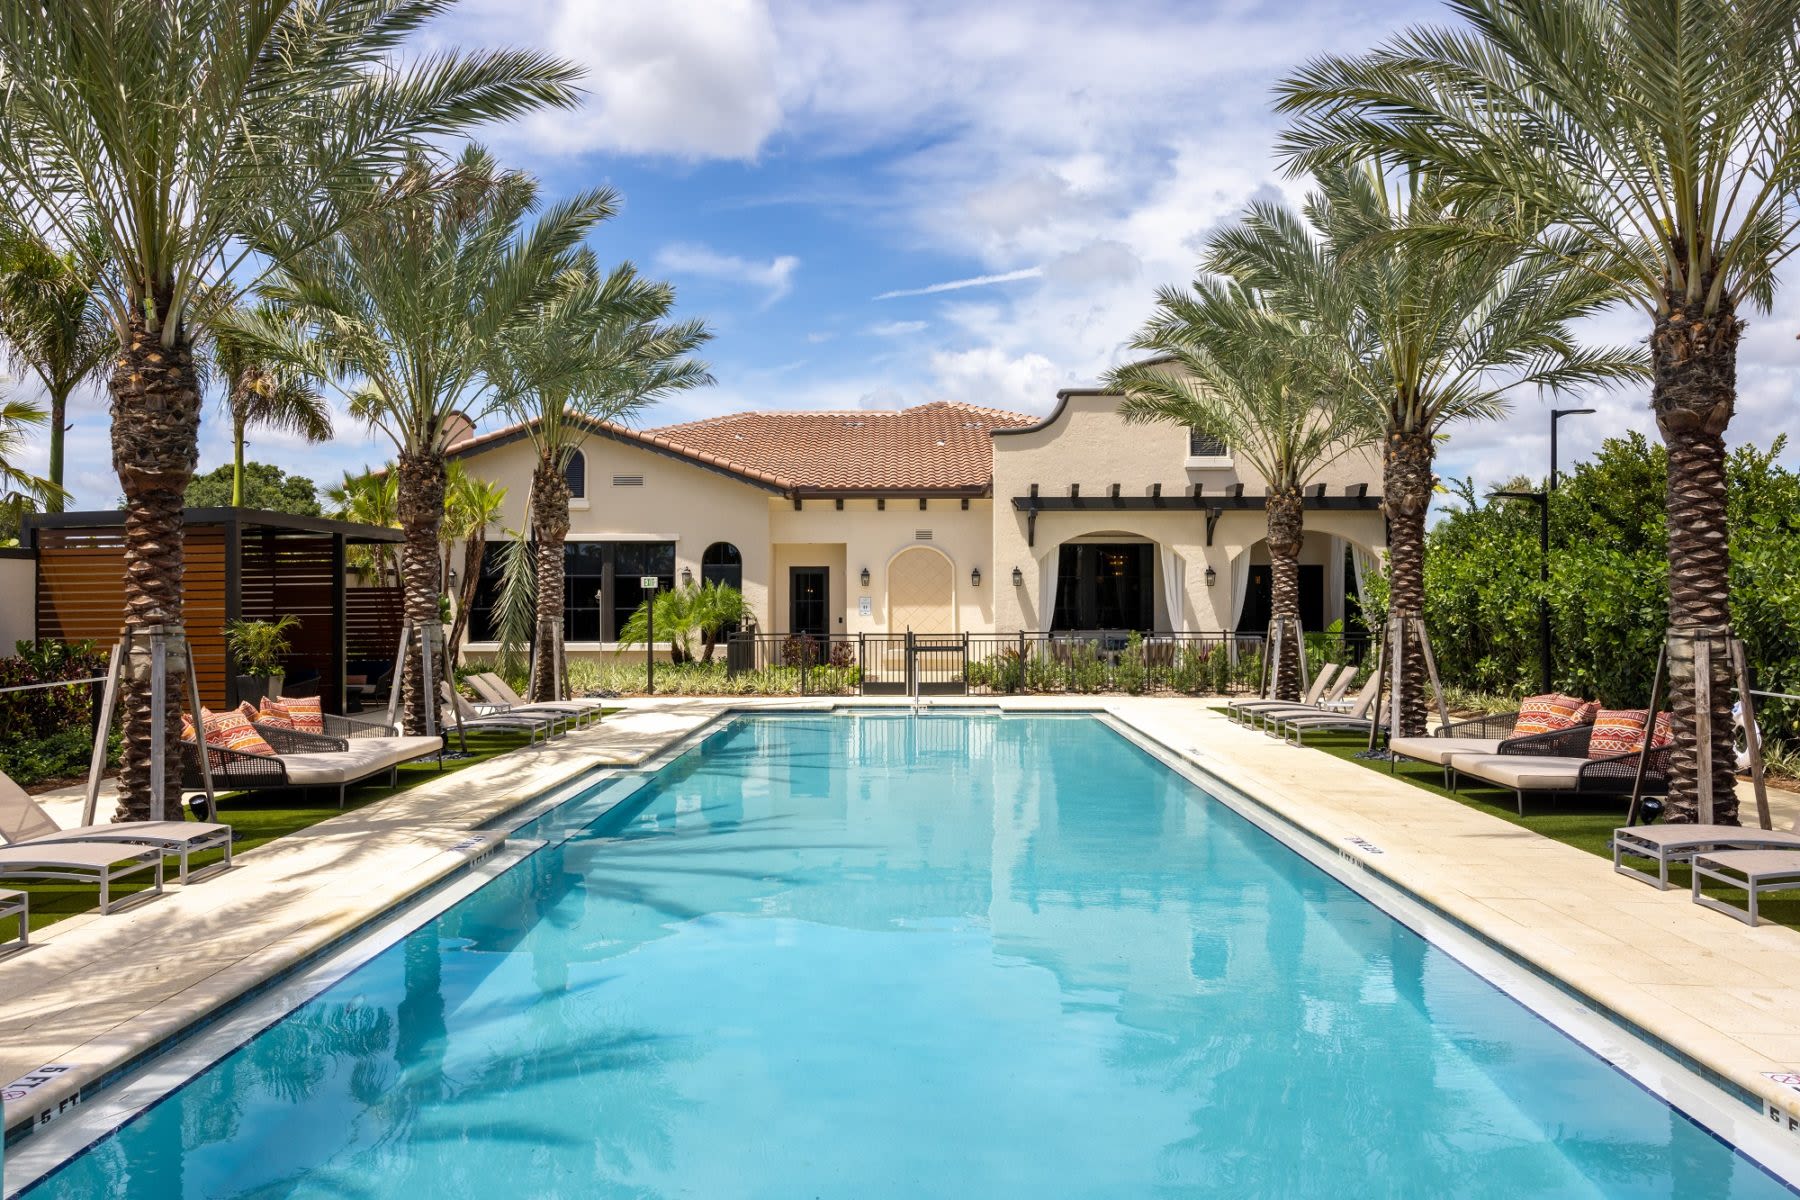 Pool oasis with palm trees, lounge chairs, clubhouse at Locklyn West Palm, West Palm Beach, Florida